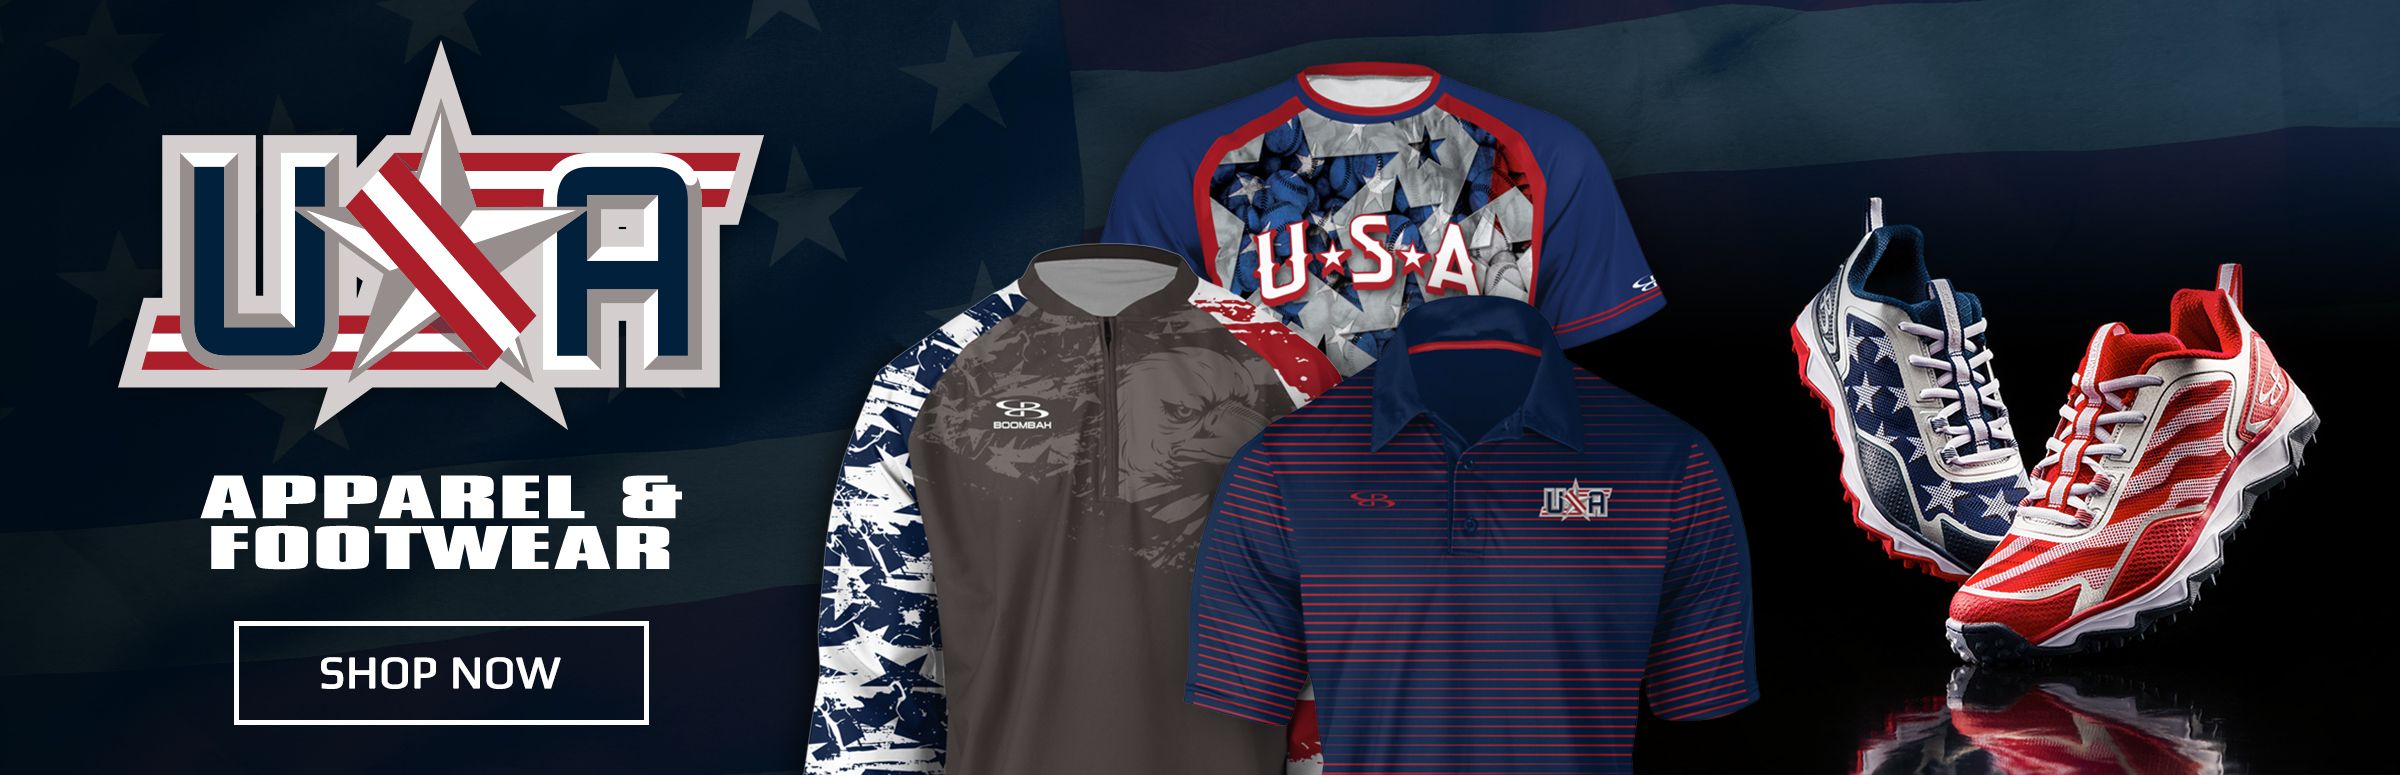 USA Apparel and Footwear